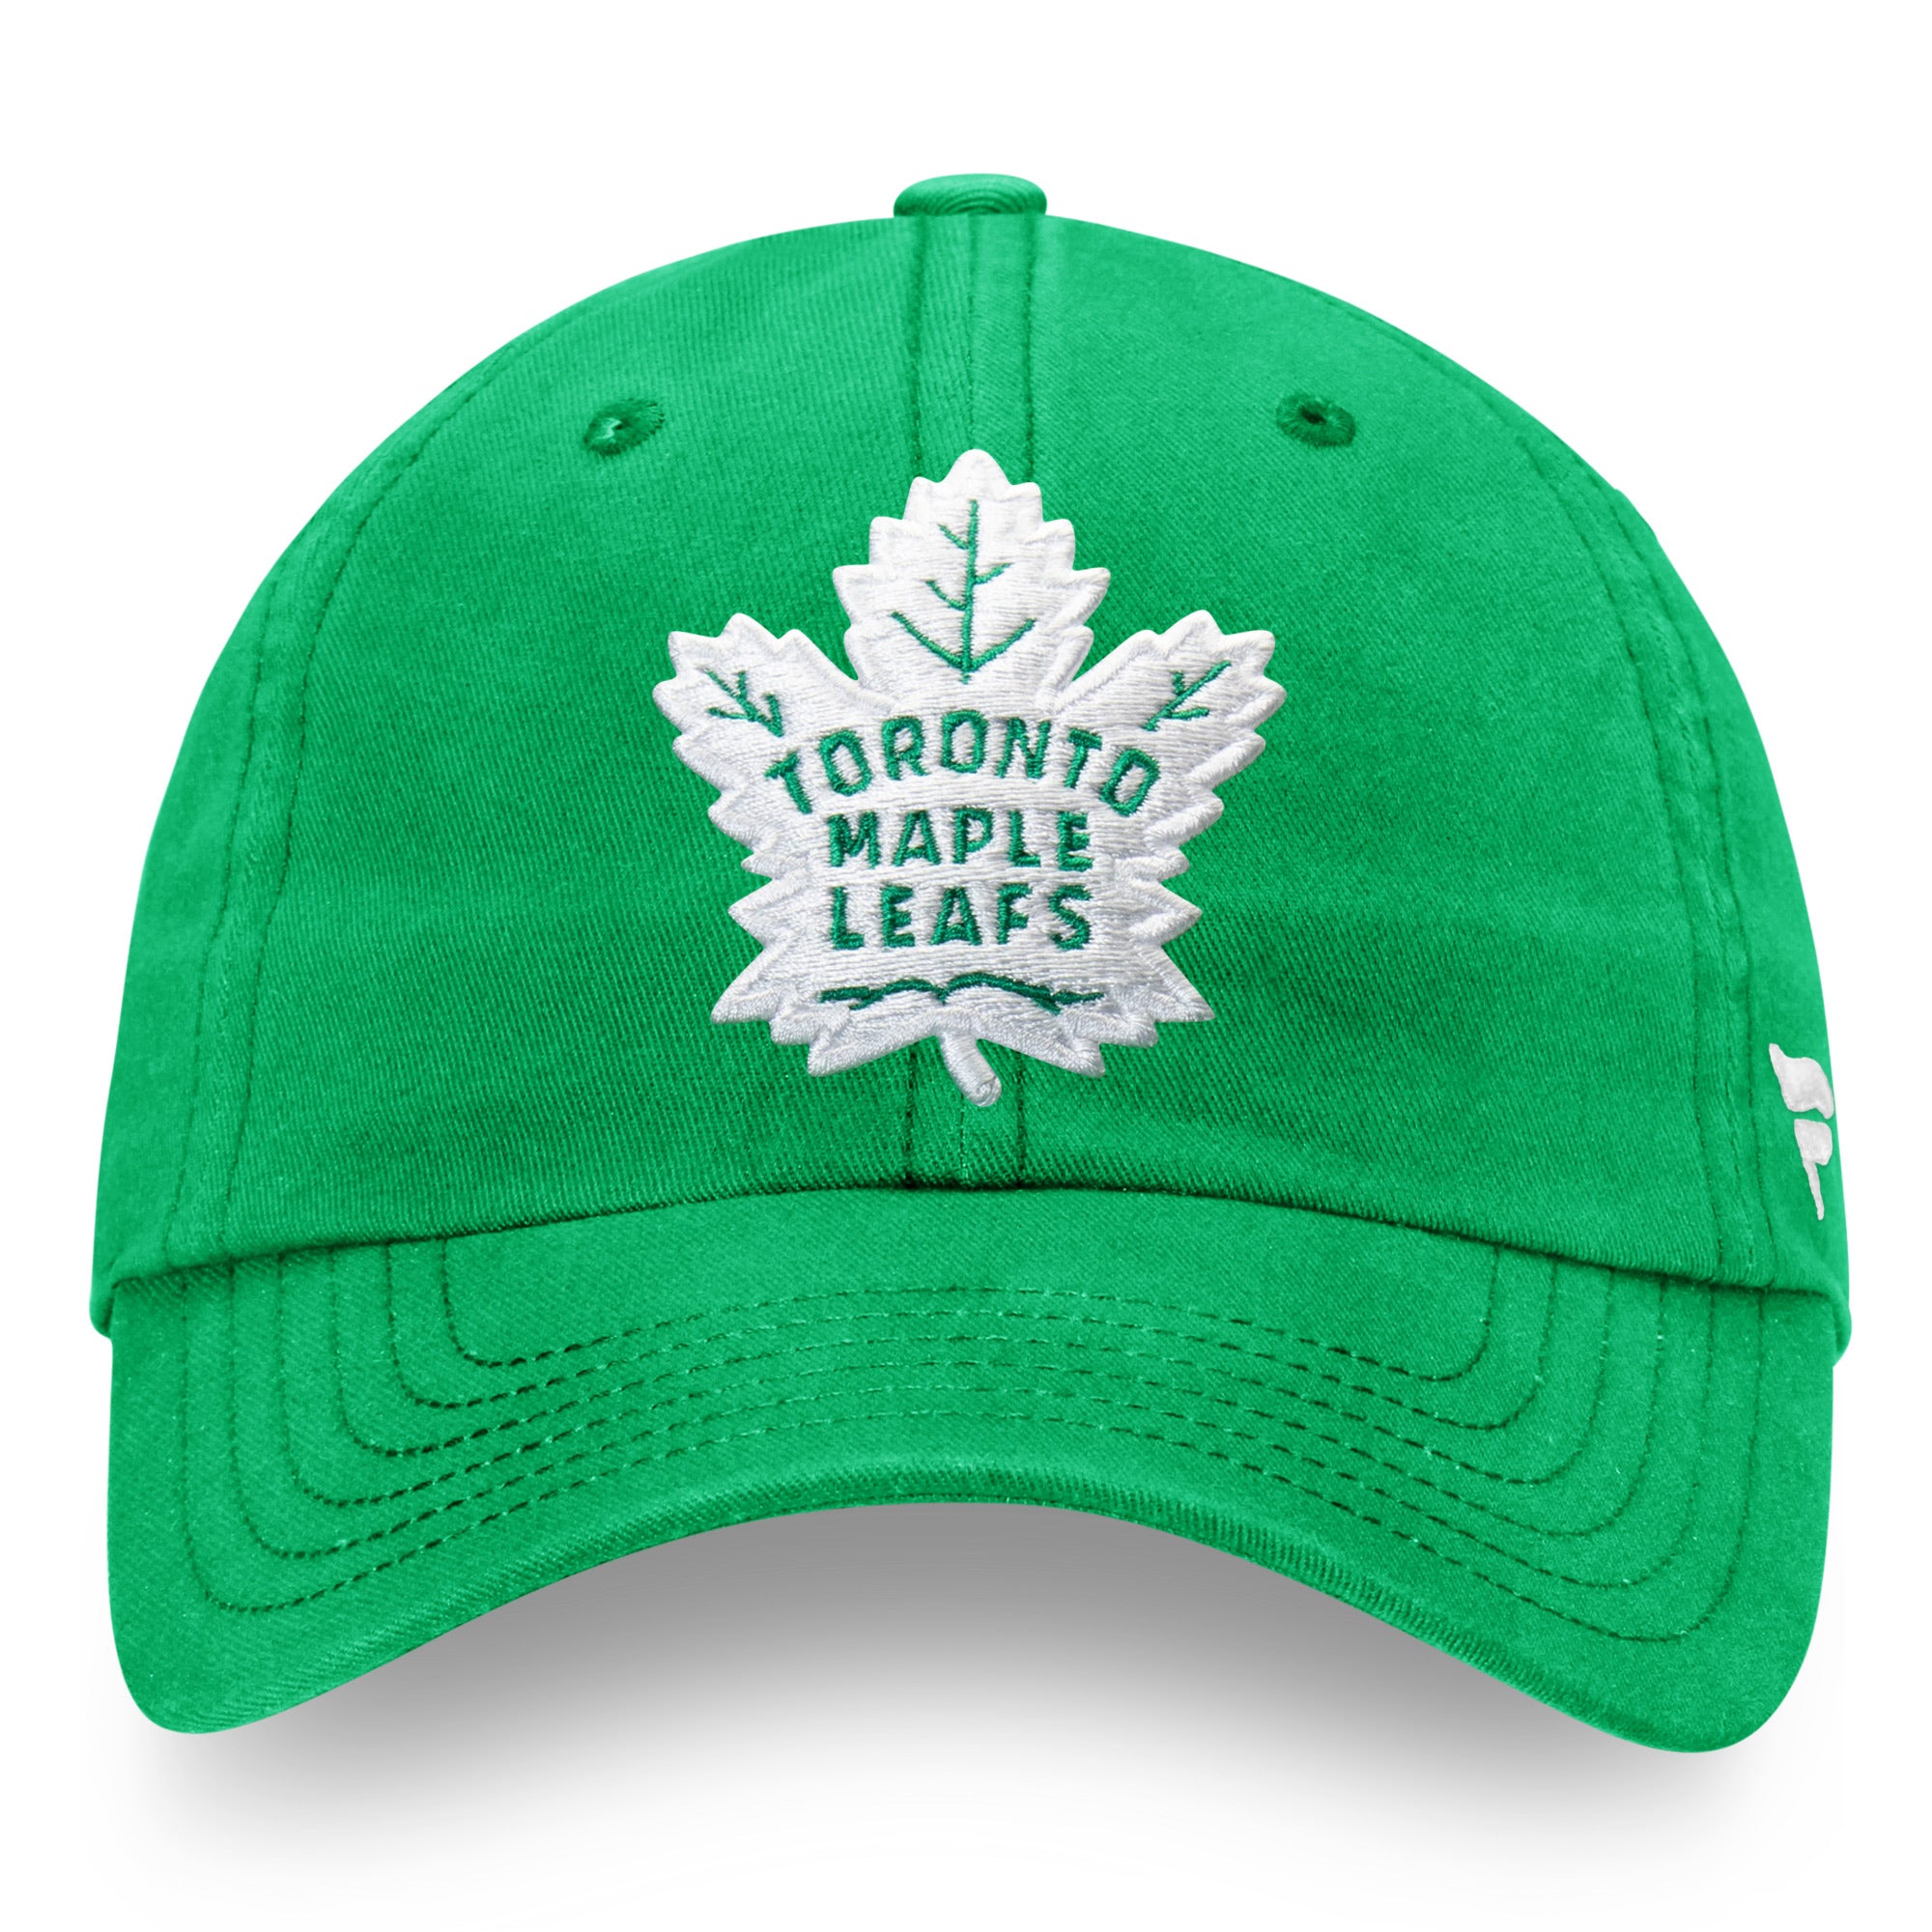 St. Pats / Maple Leafs crossover logo in honour of St. Patrick's